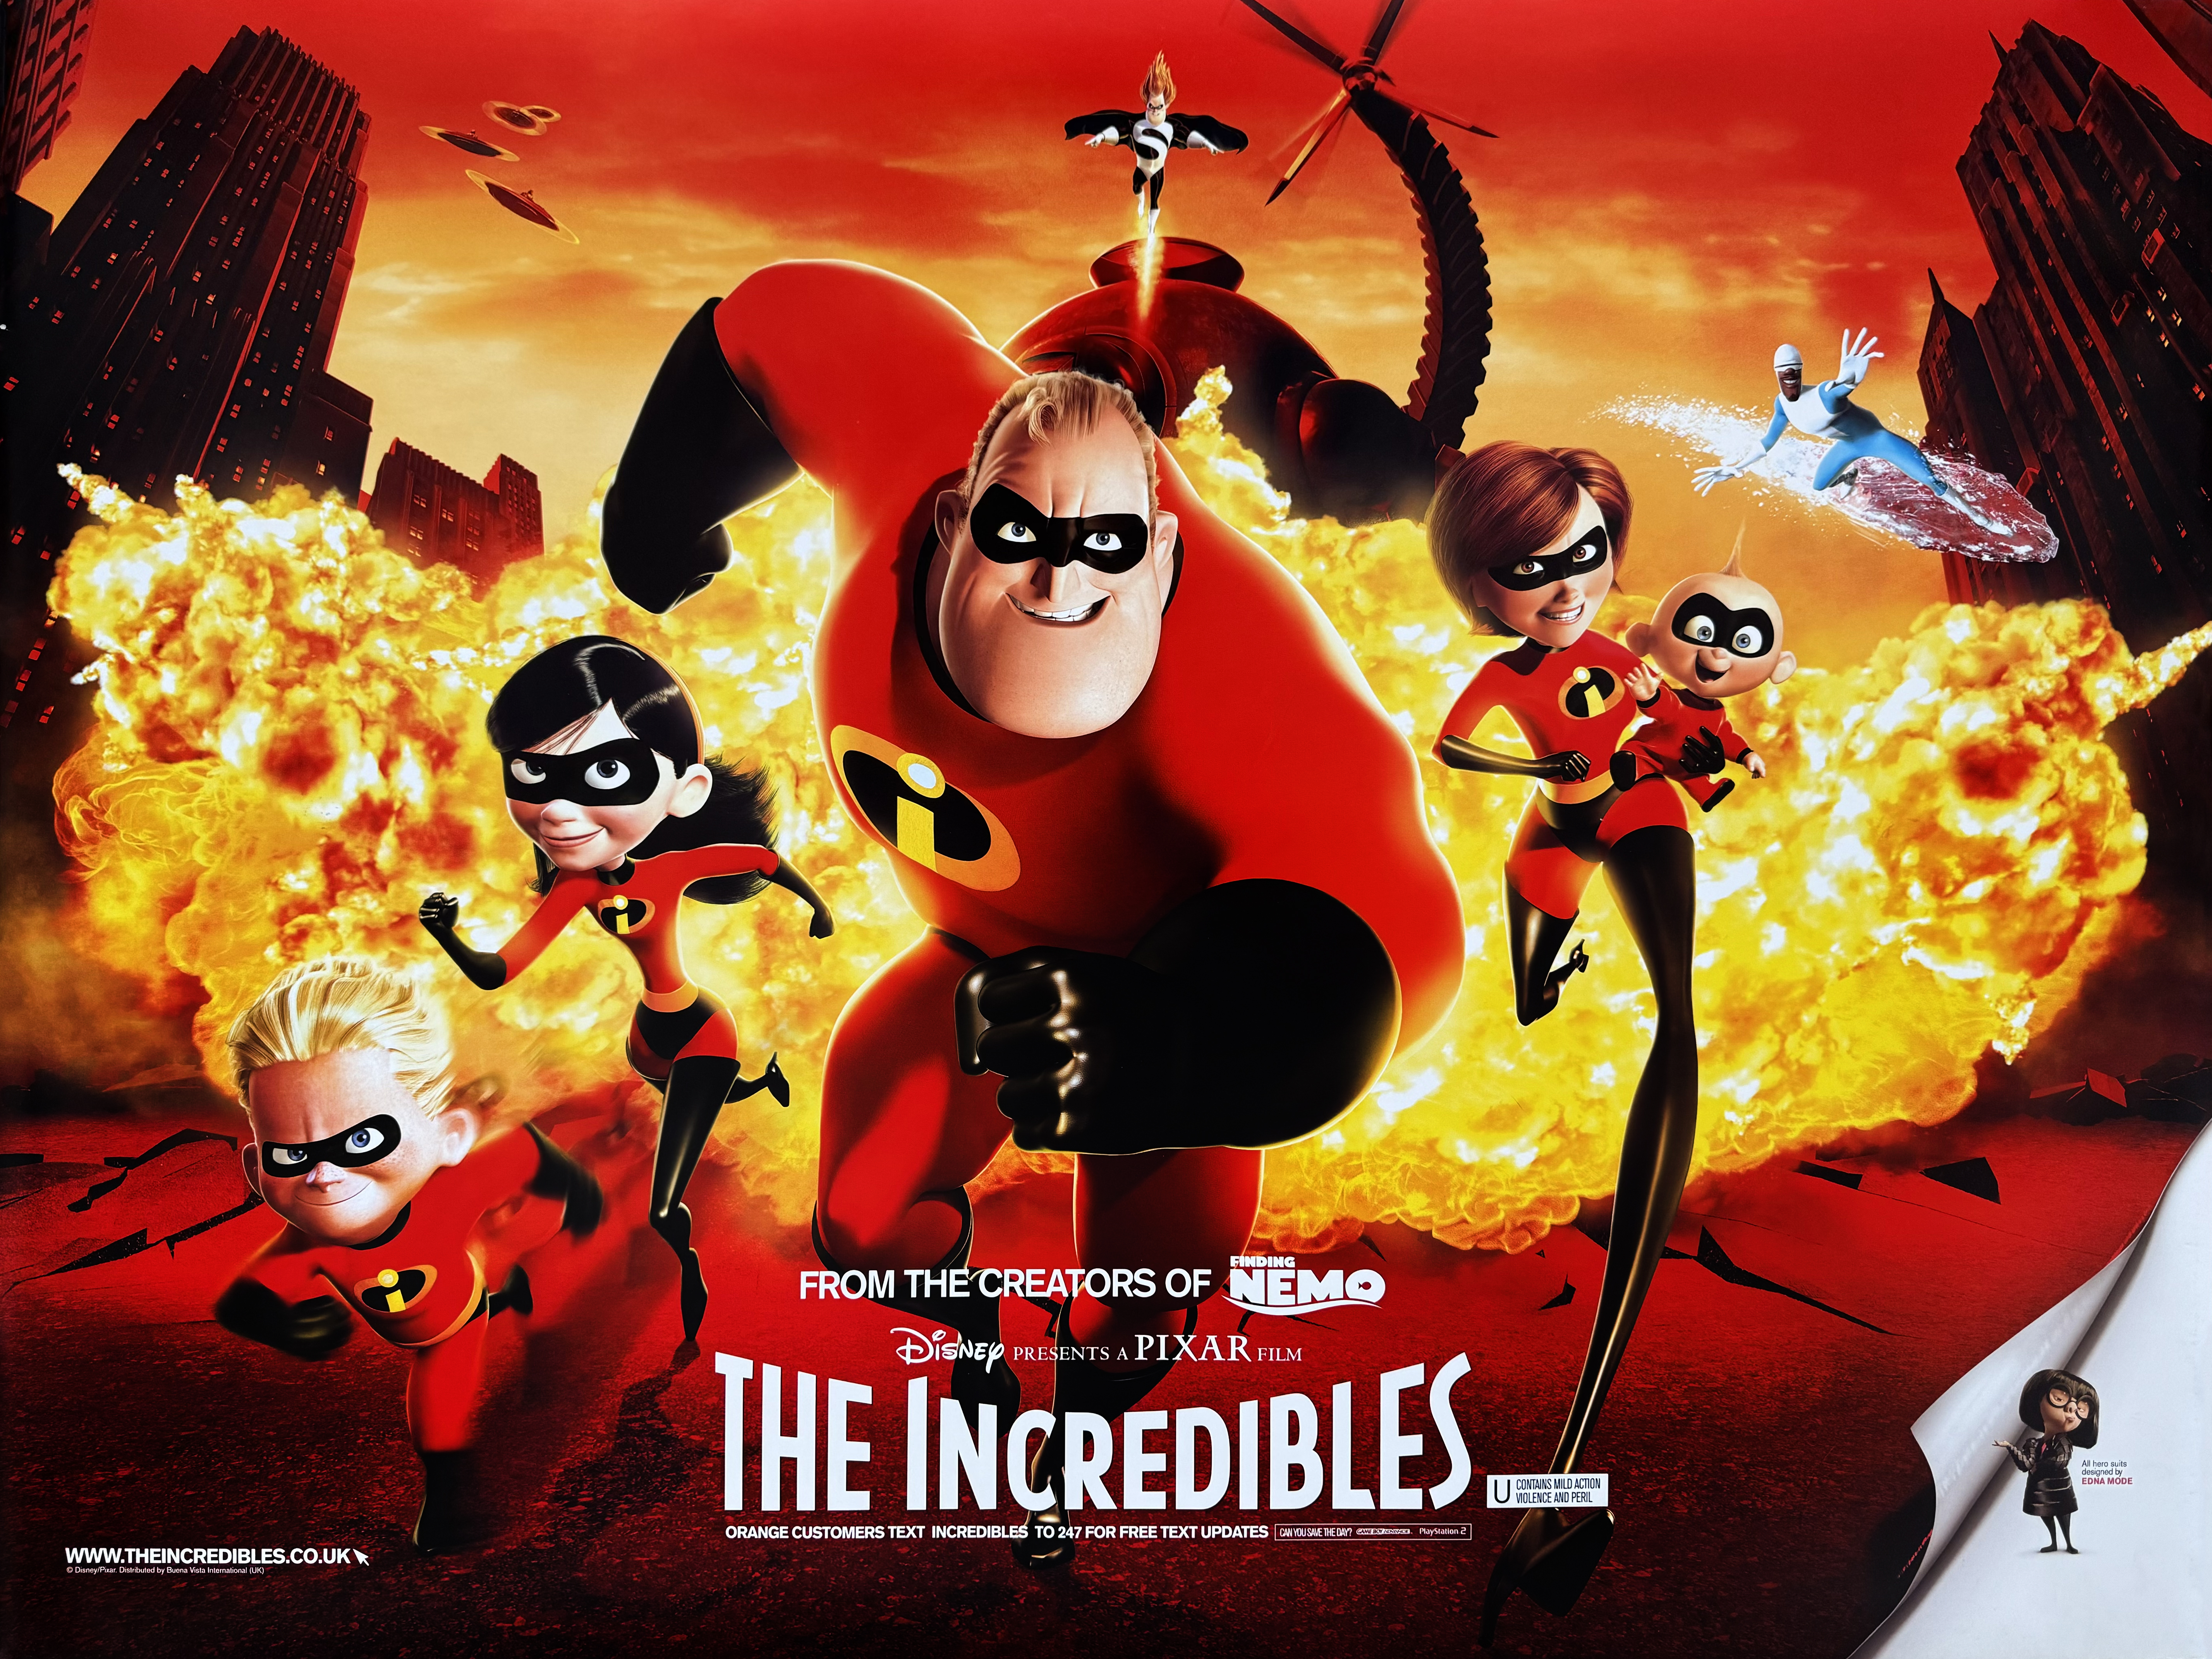 The Incredibles movie quad poster